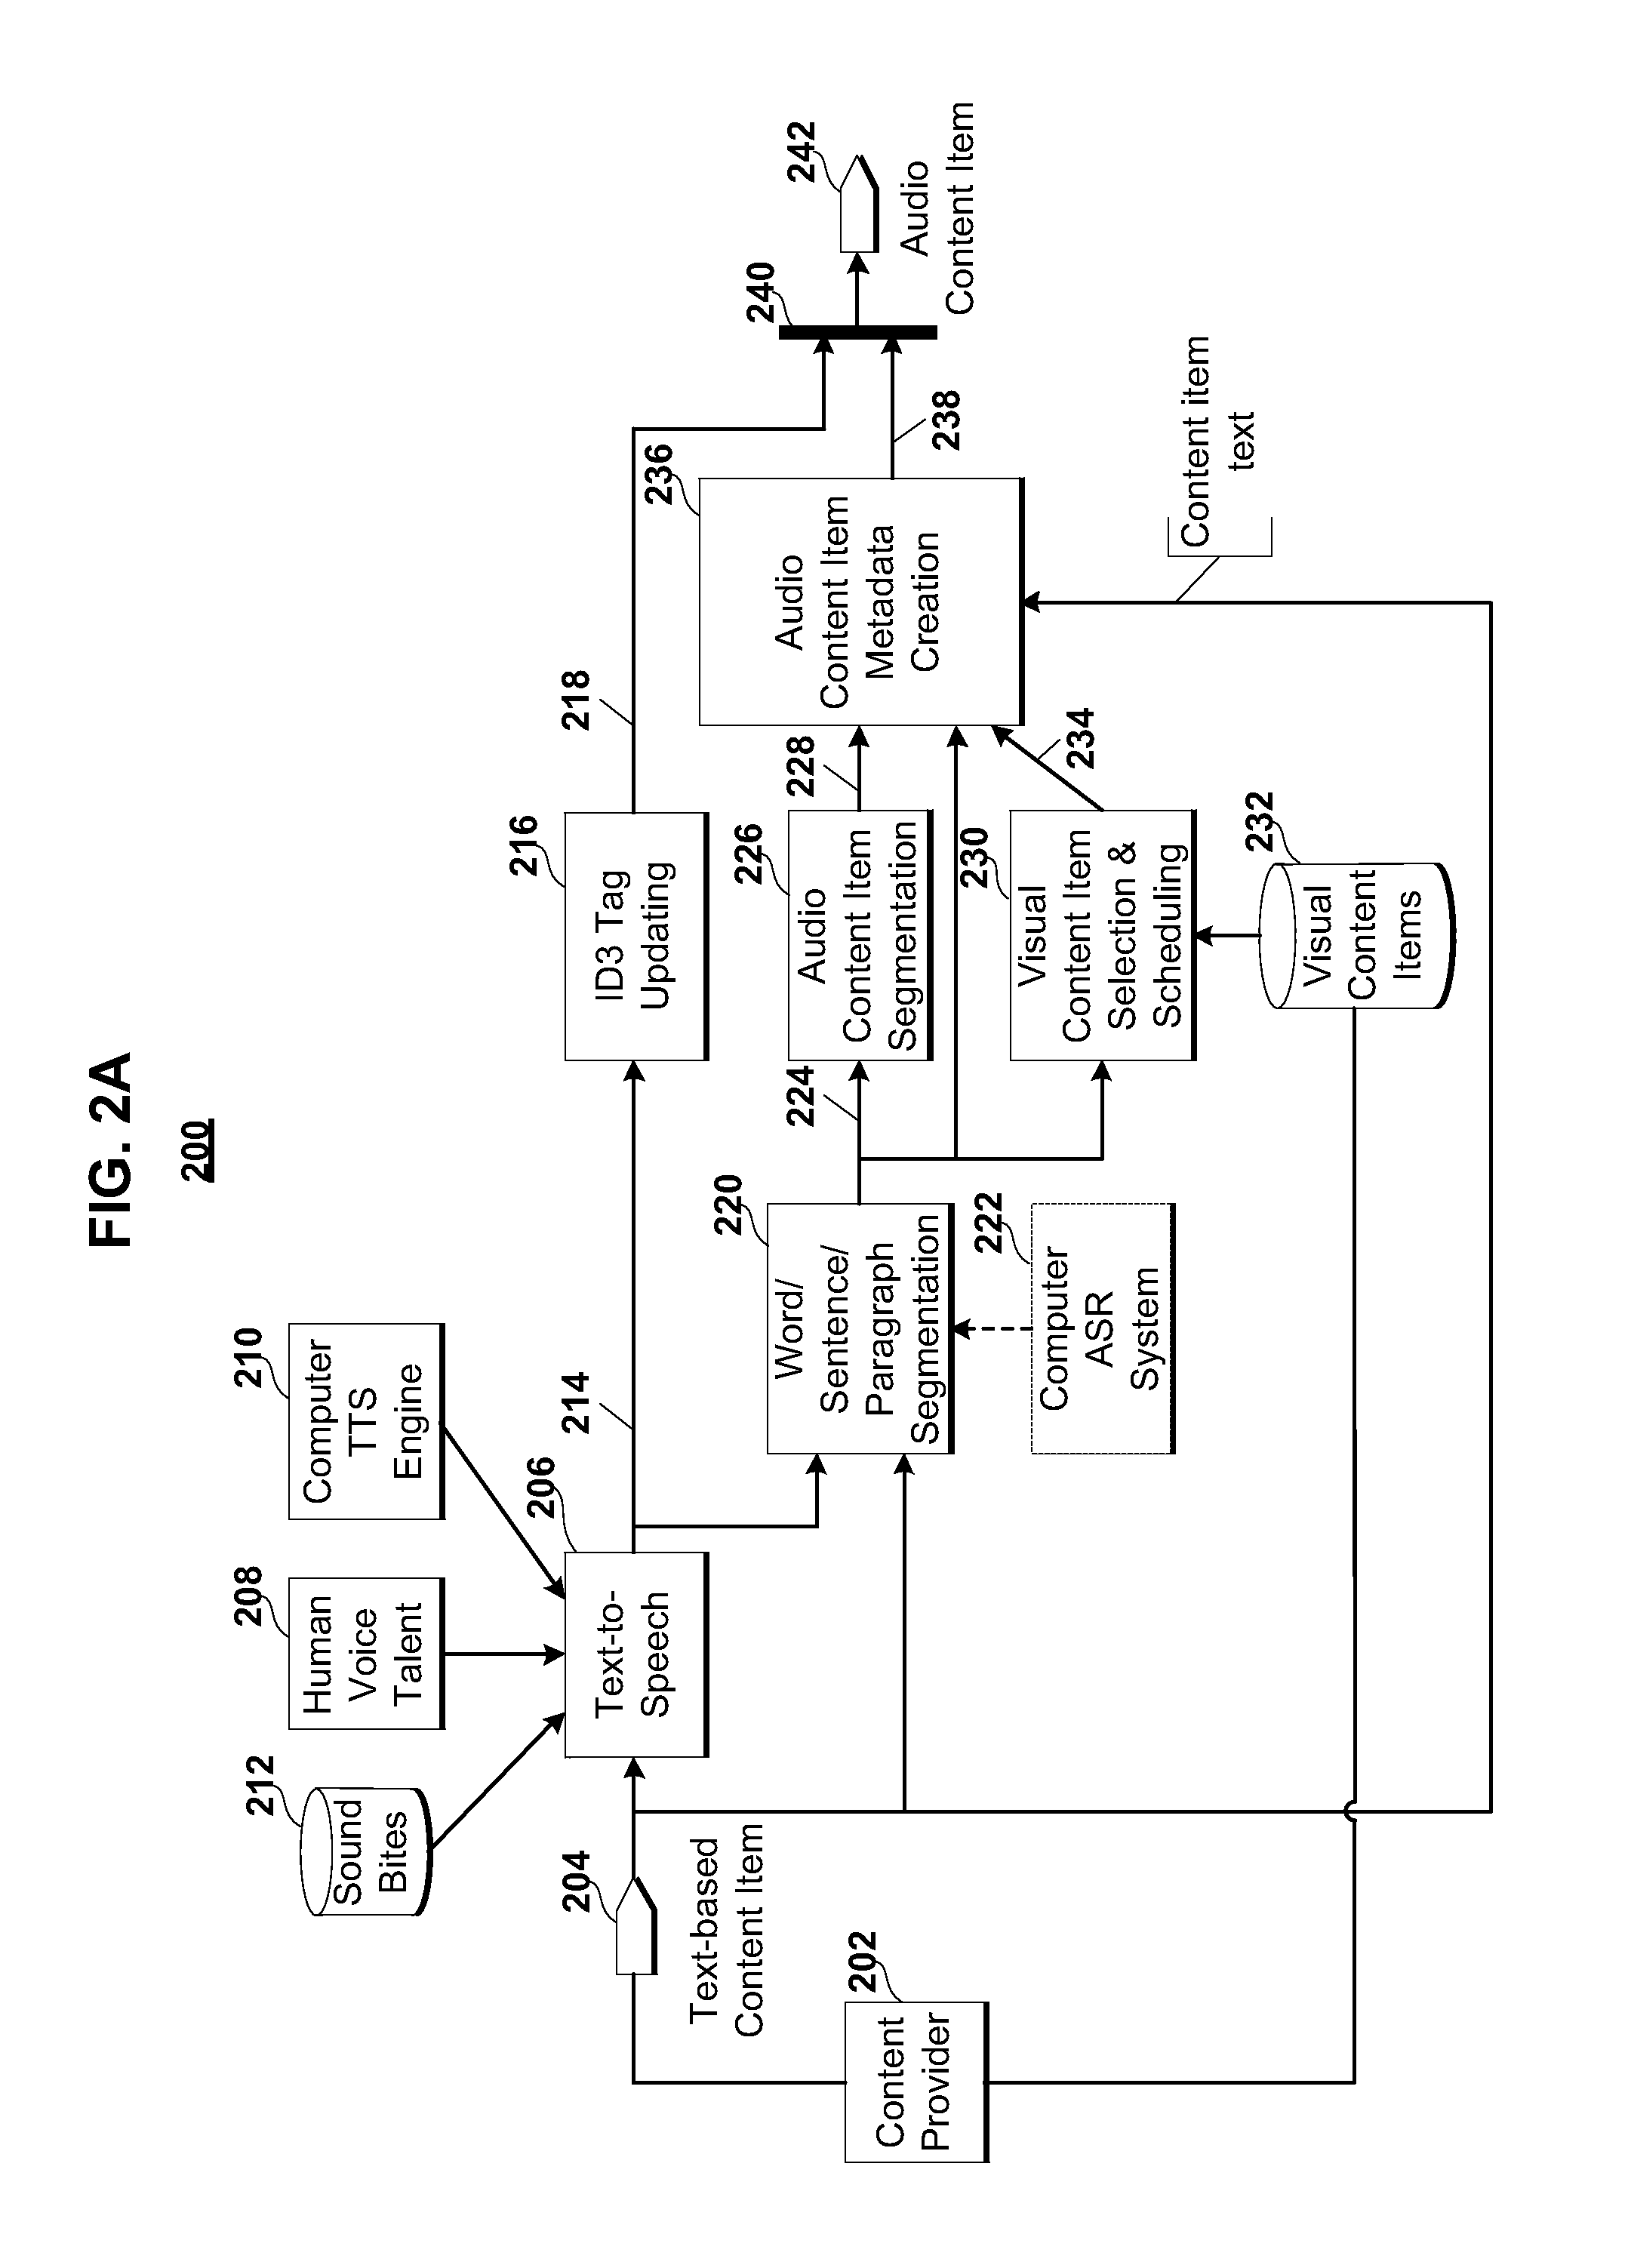 System, method, and apparatus for generating, customizing, distributing, and presenting an interactive audio publication